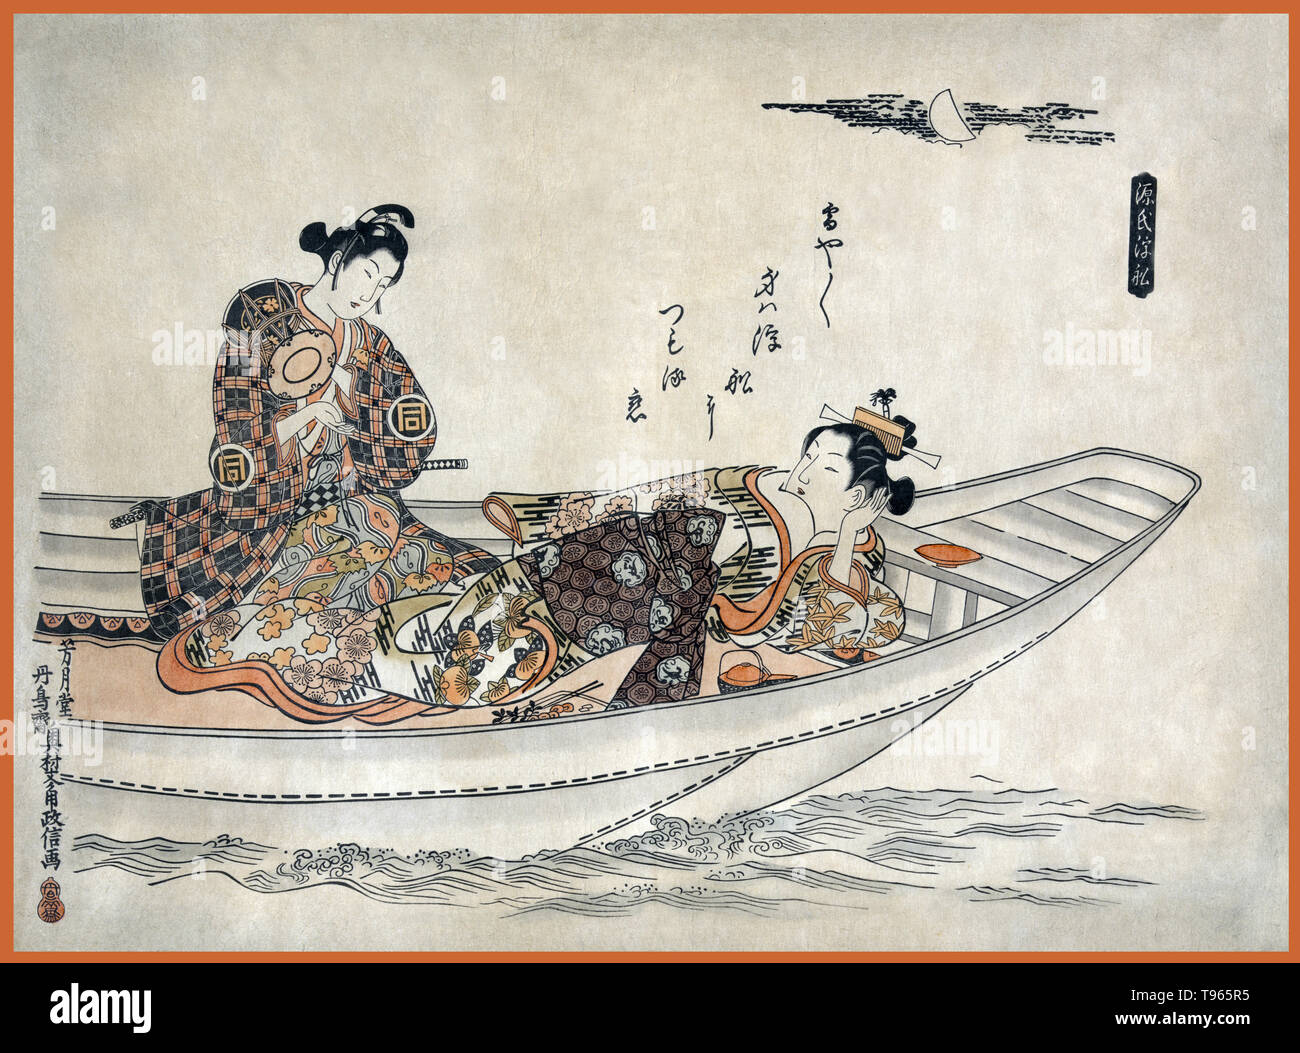 Two lovers in a boat. Shows a man and a woman in a boat; the man is holding a small drum and appears to be serenading the woman beneath the moon. Ukiyo-e (picture of the floating world) is a genre of Japanese art which flourished from the 17th through 19th centuries. Ukiyo-e was central to forming the West's perception of Japanese art in the late 19th century. Stock Photo